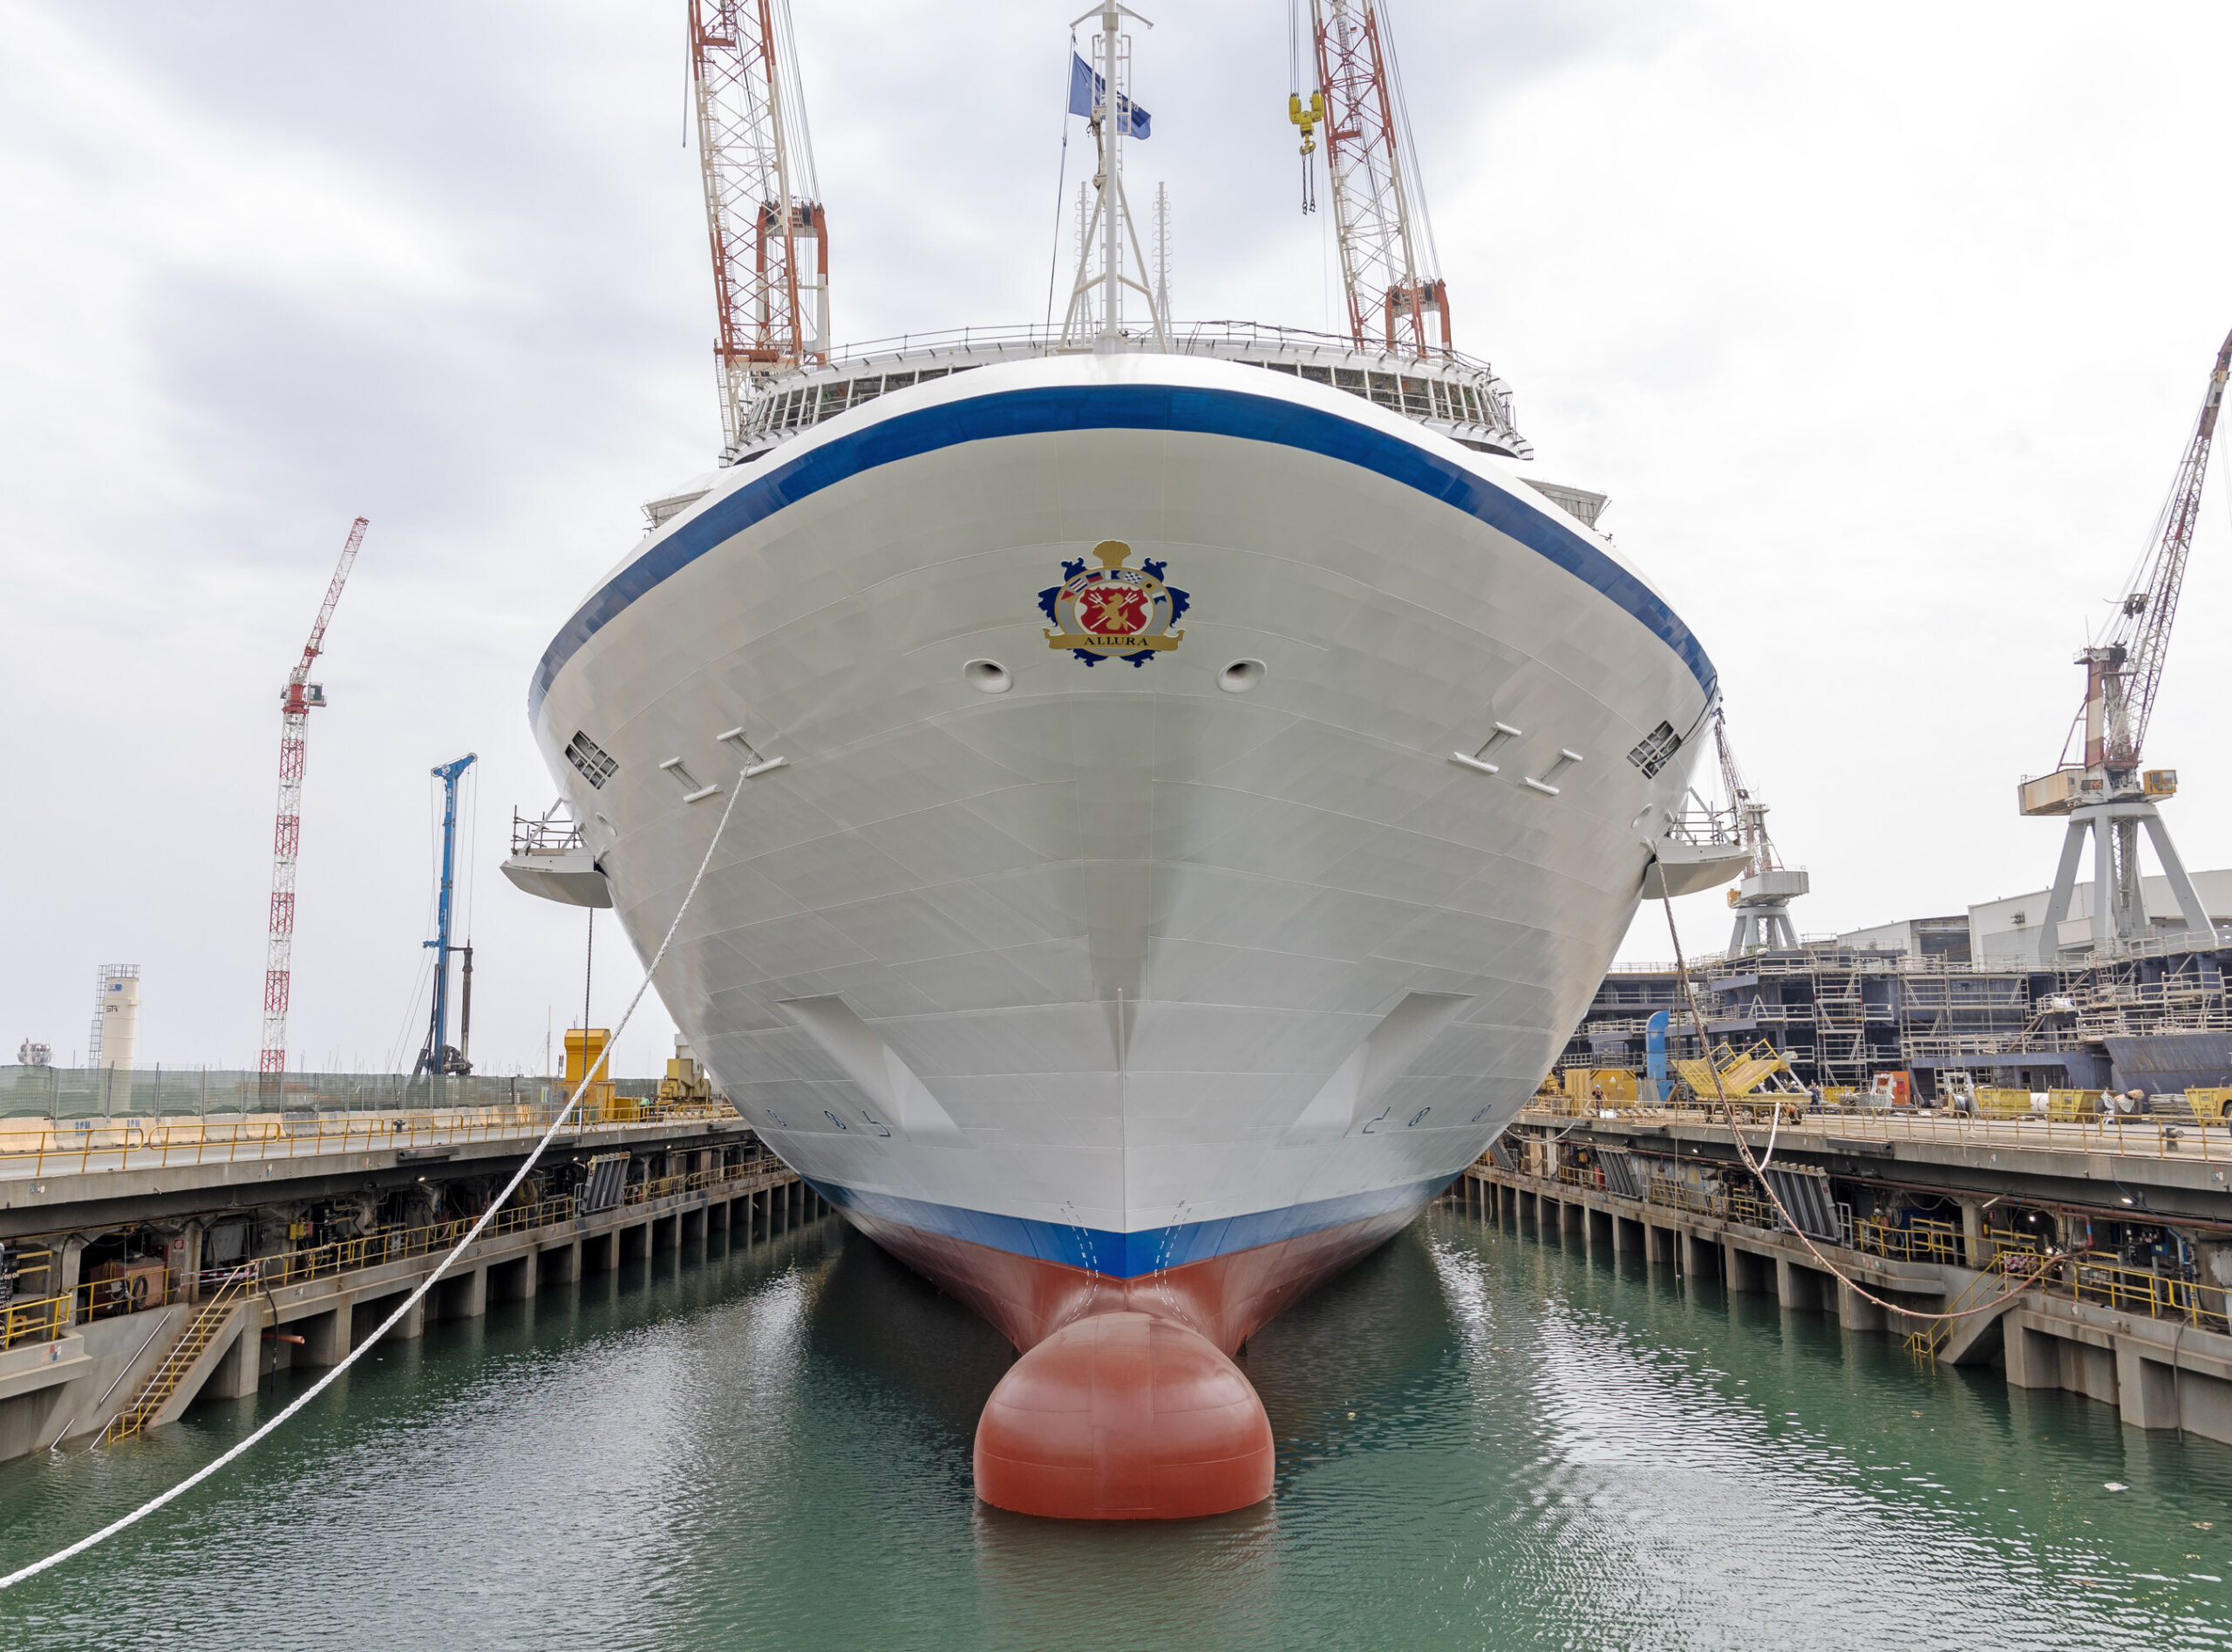 Oceania Cruises celebrates a milestone as its new 1,200-guest ship, Allura, floats out at Fincantieri shipyard in Genoa, Italy, moving closer to its completion with luxurious interiors.